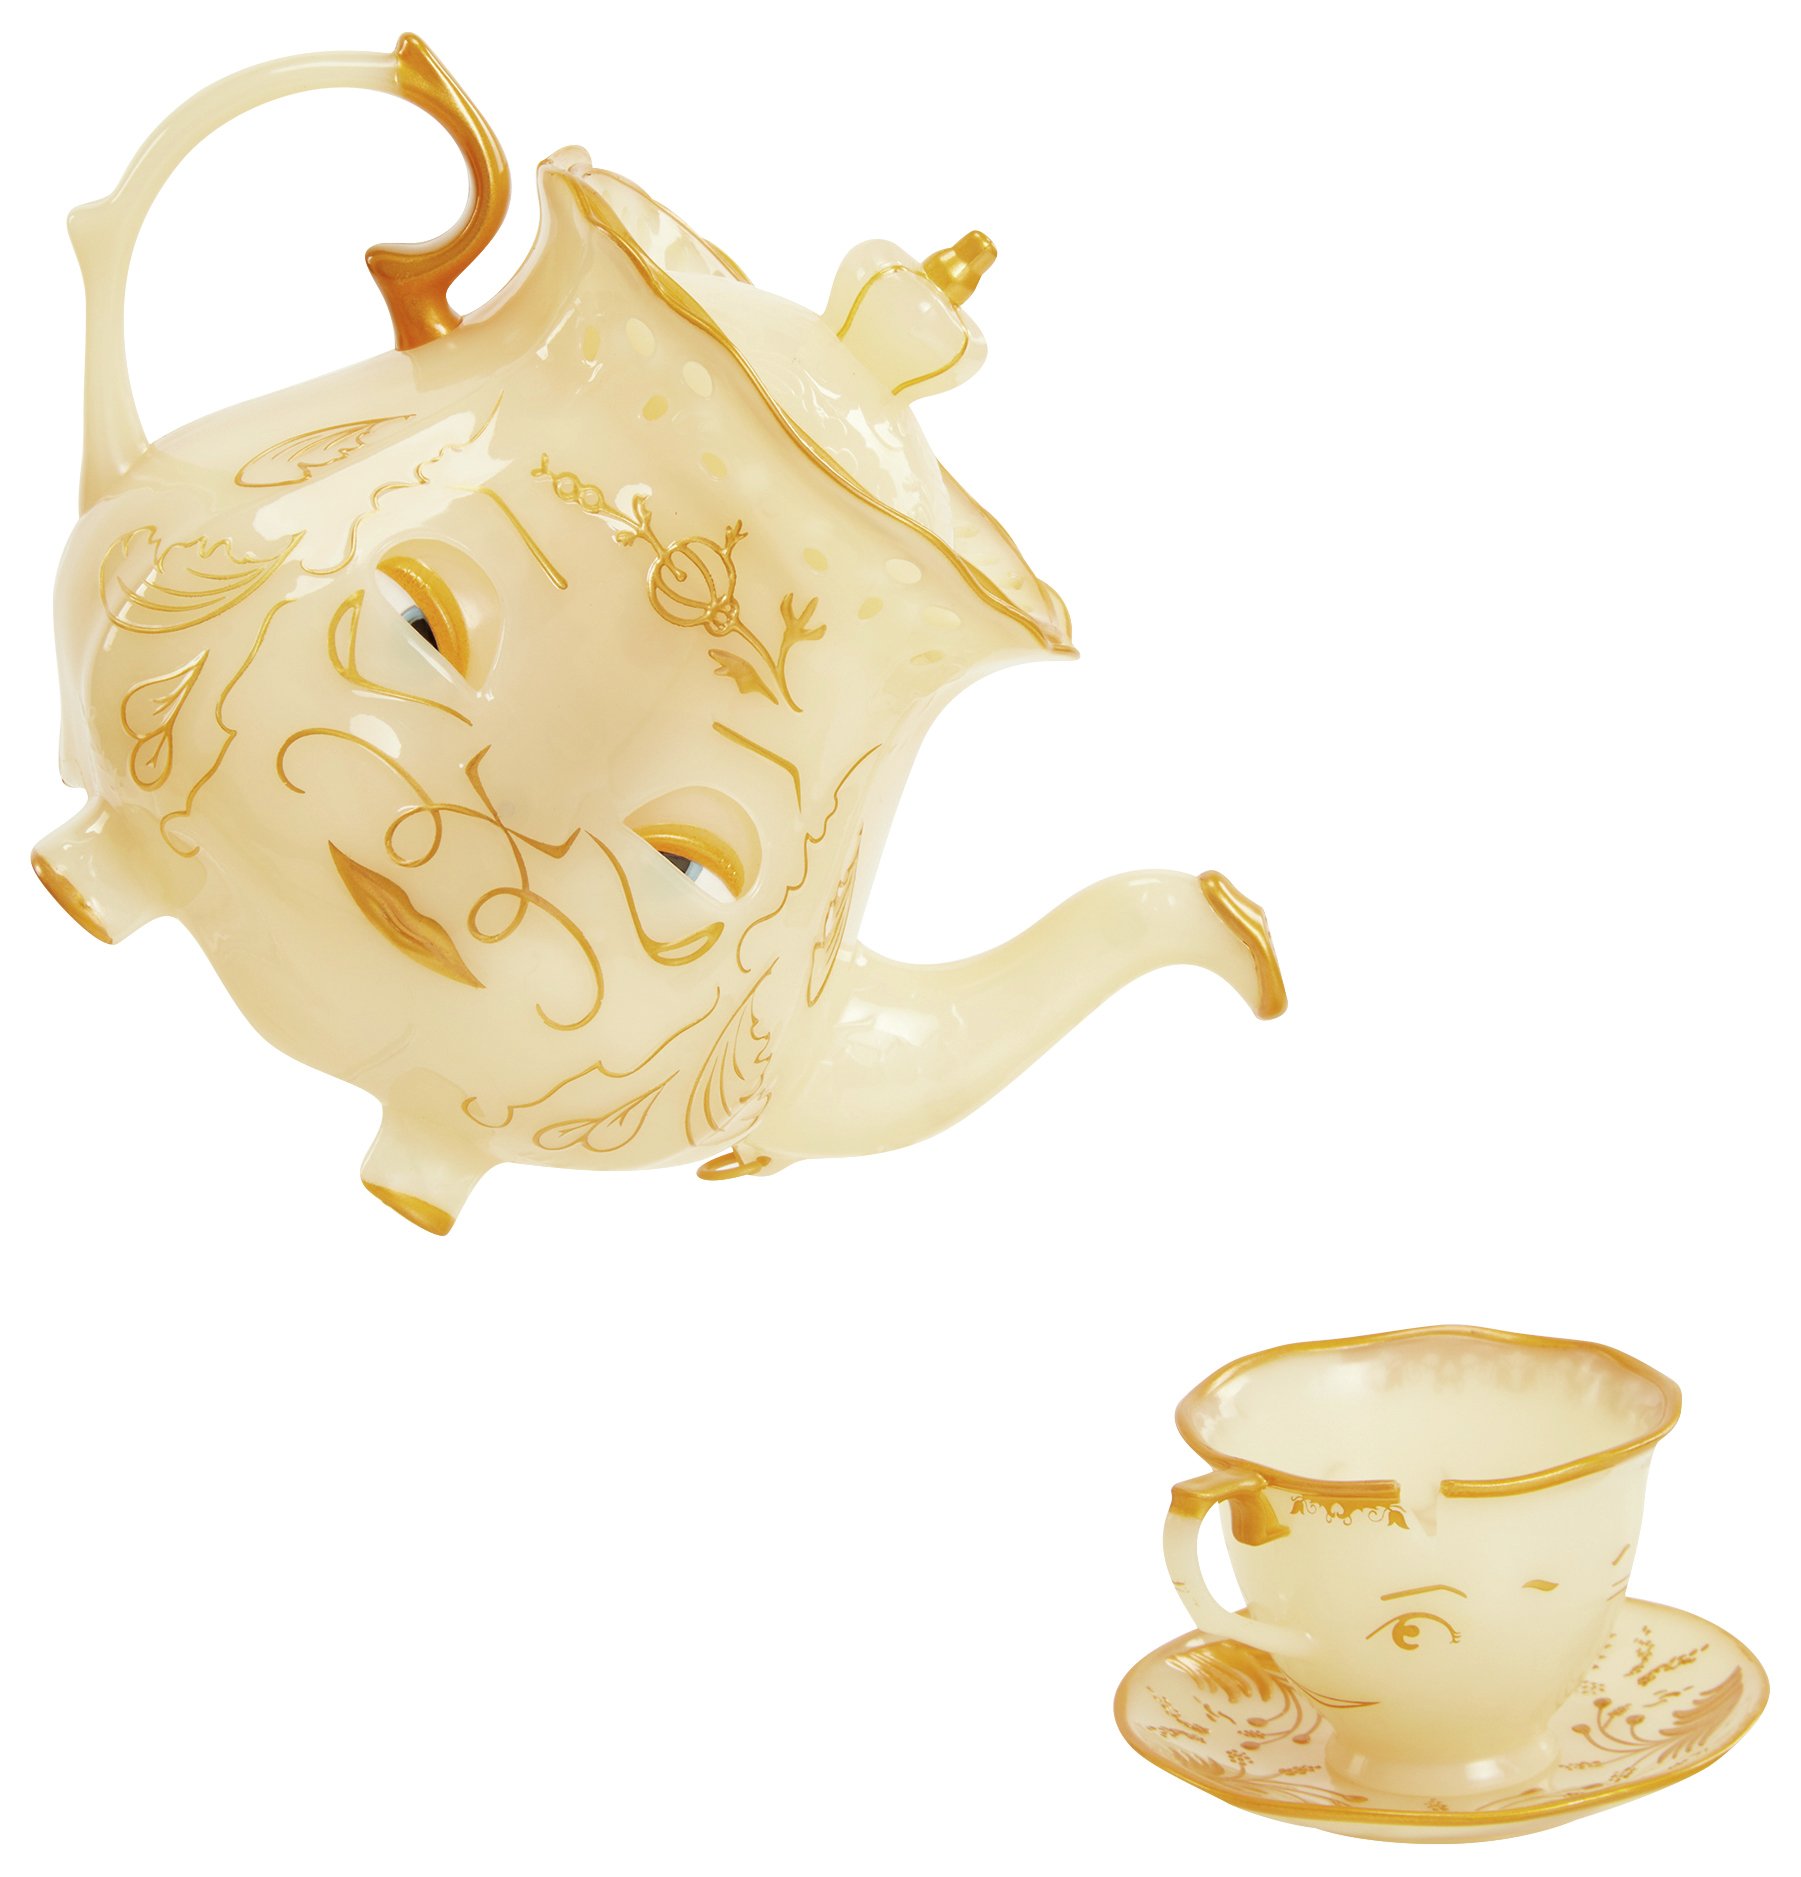 Beauty and the Beast Enchanted Objects Tea Set. Review